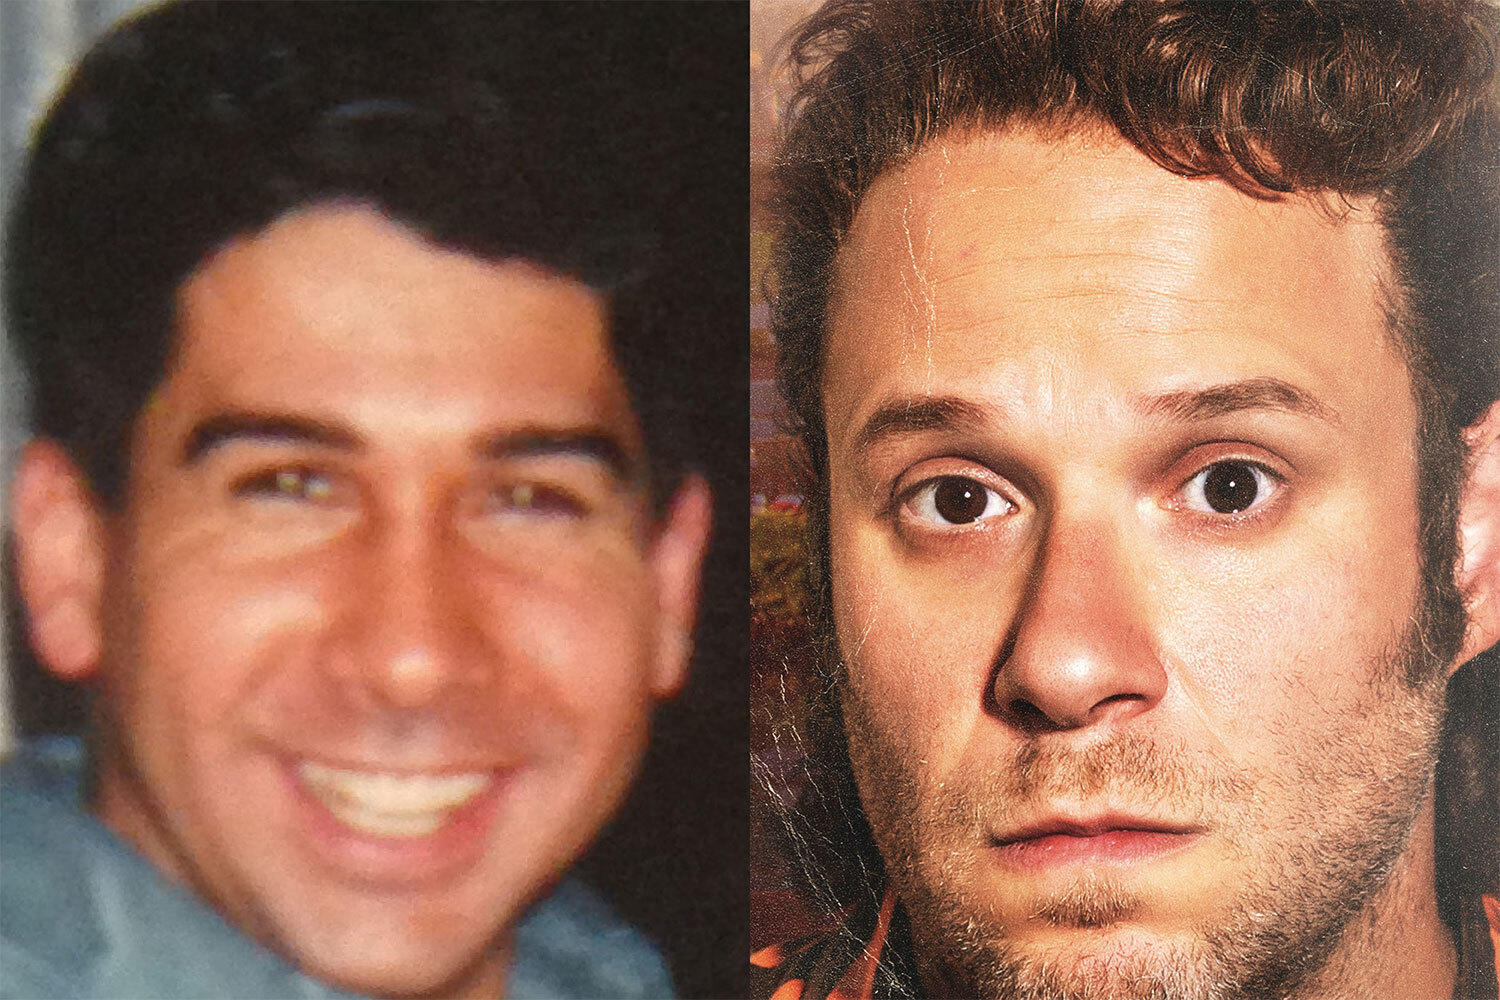 Rand Gauthier who was thief played by Seth Rogen in Pam and Tommy, and where is he now? pic